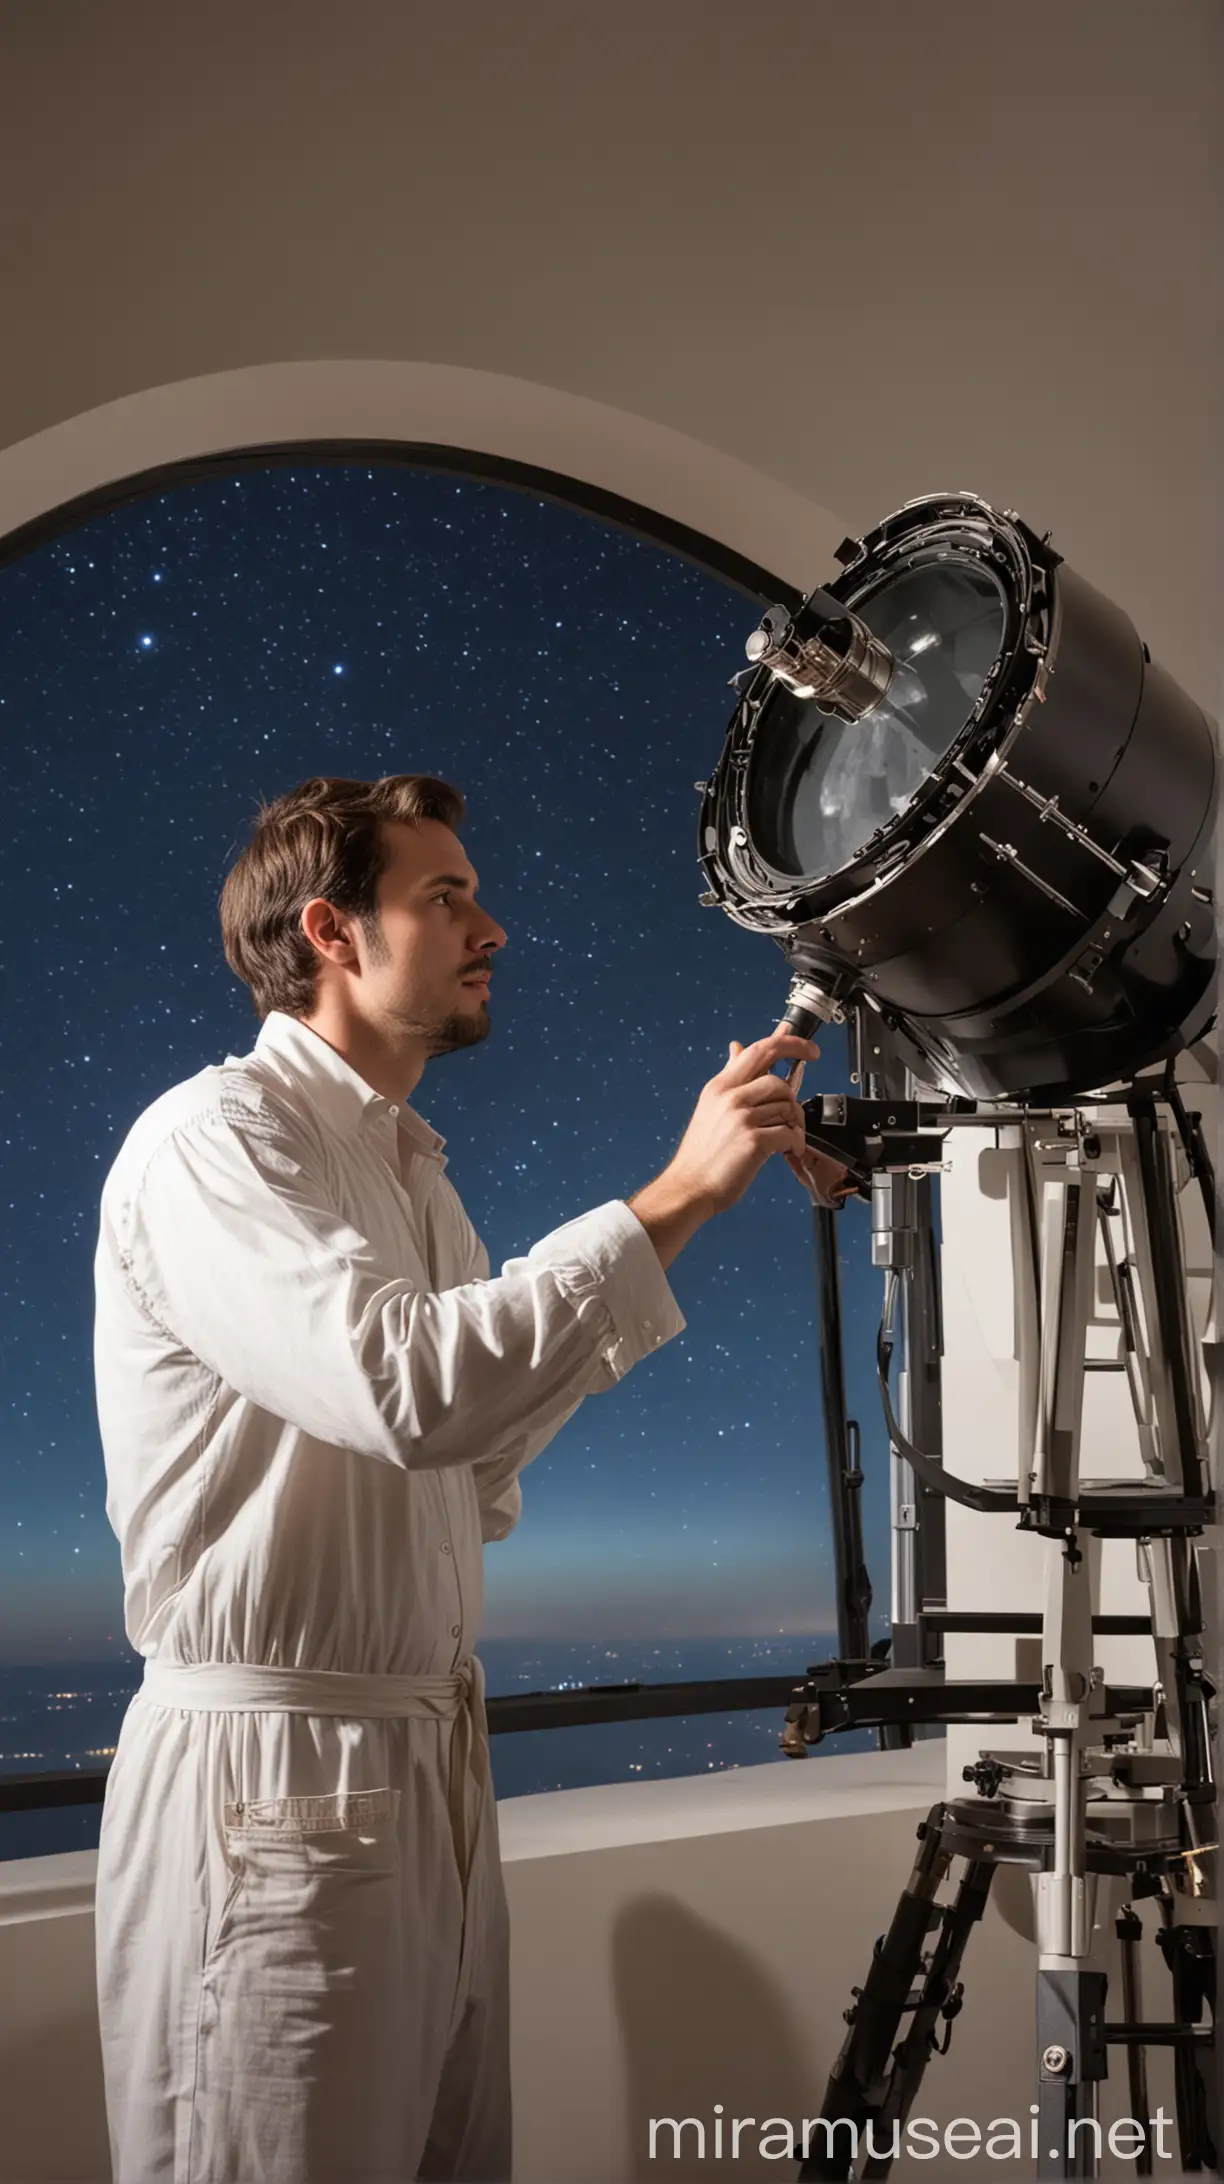 Dedicated Astronomer Observing Celestial Wonders in the Observatory